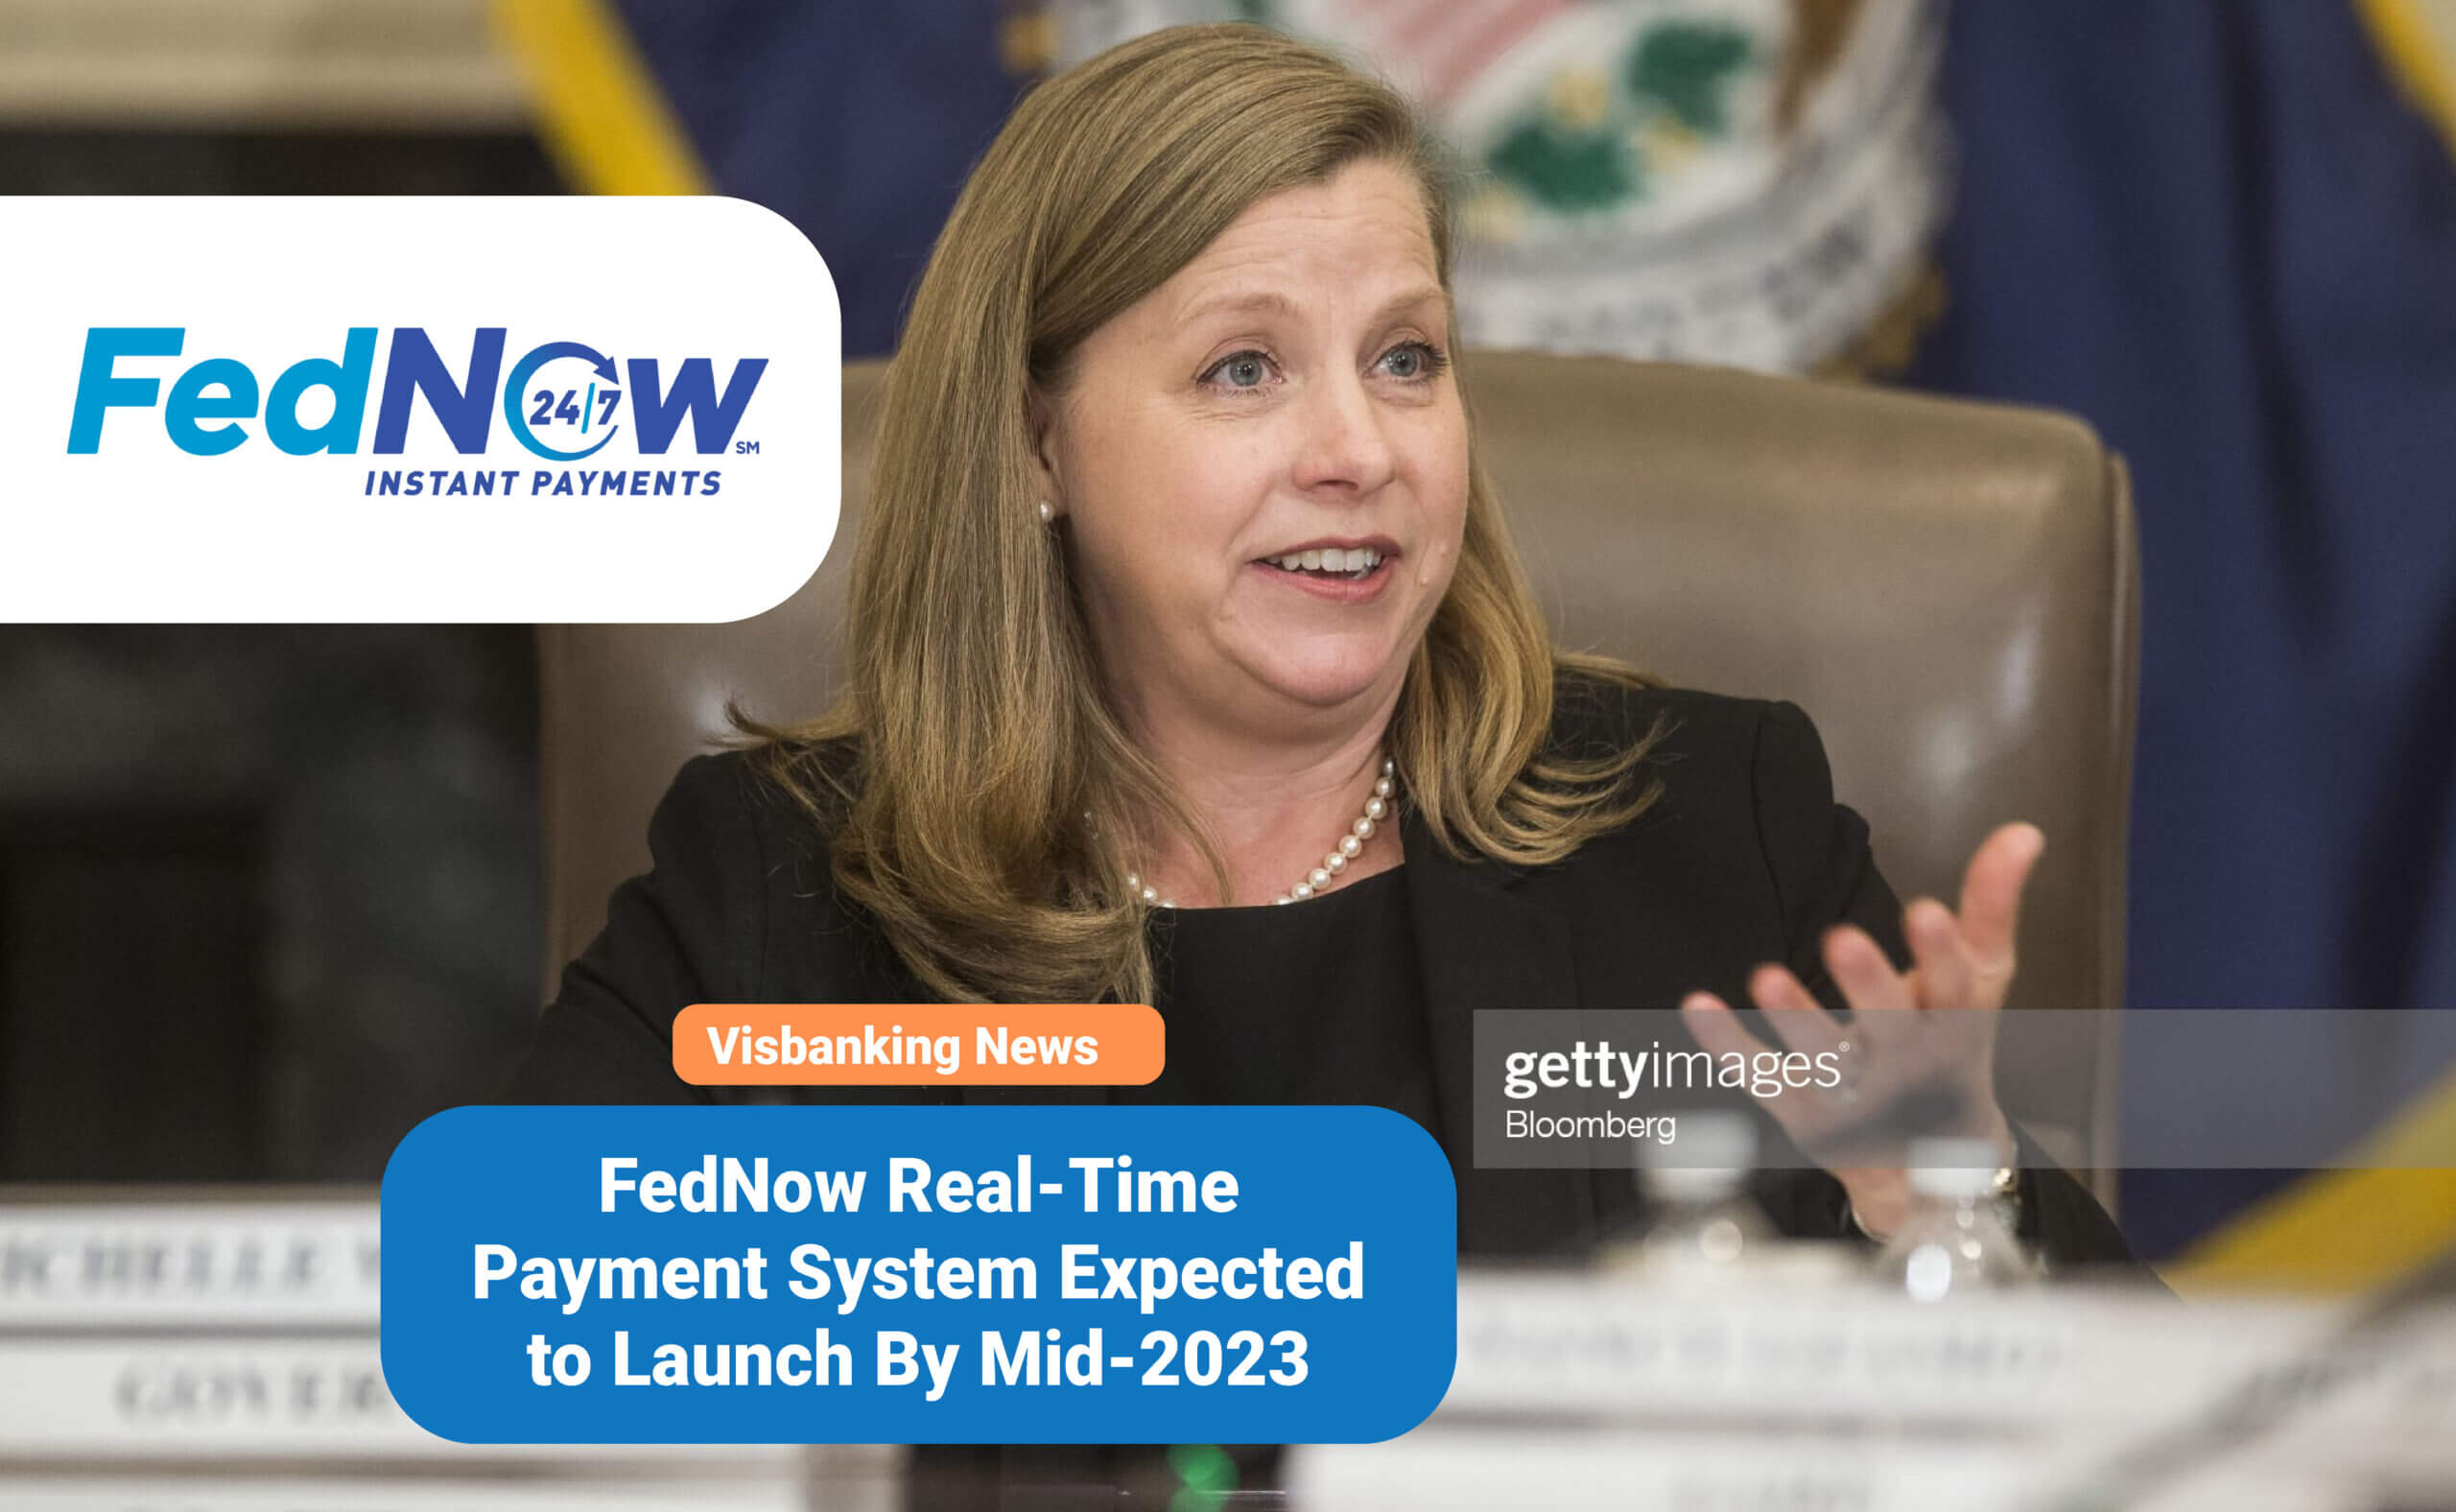 FedNow Real-Time Payment System Expected to Launch By Mid-2023